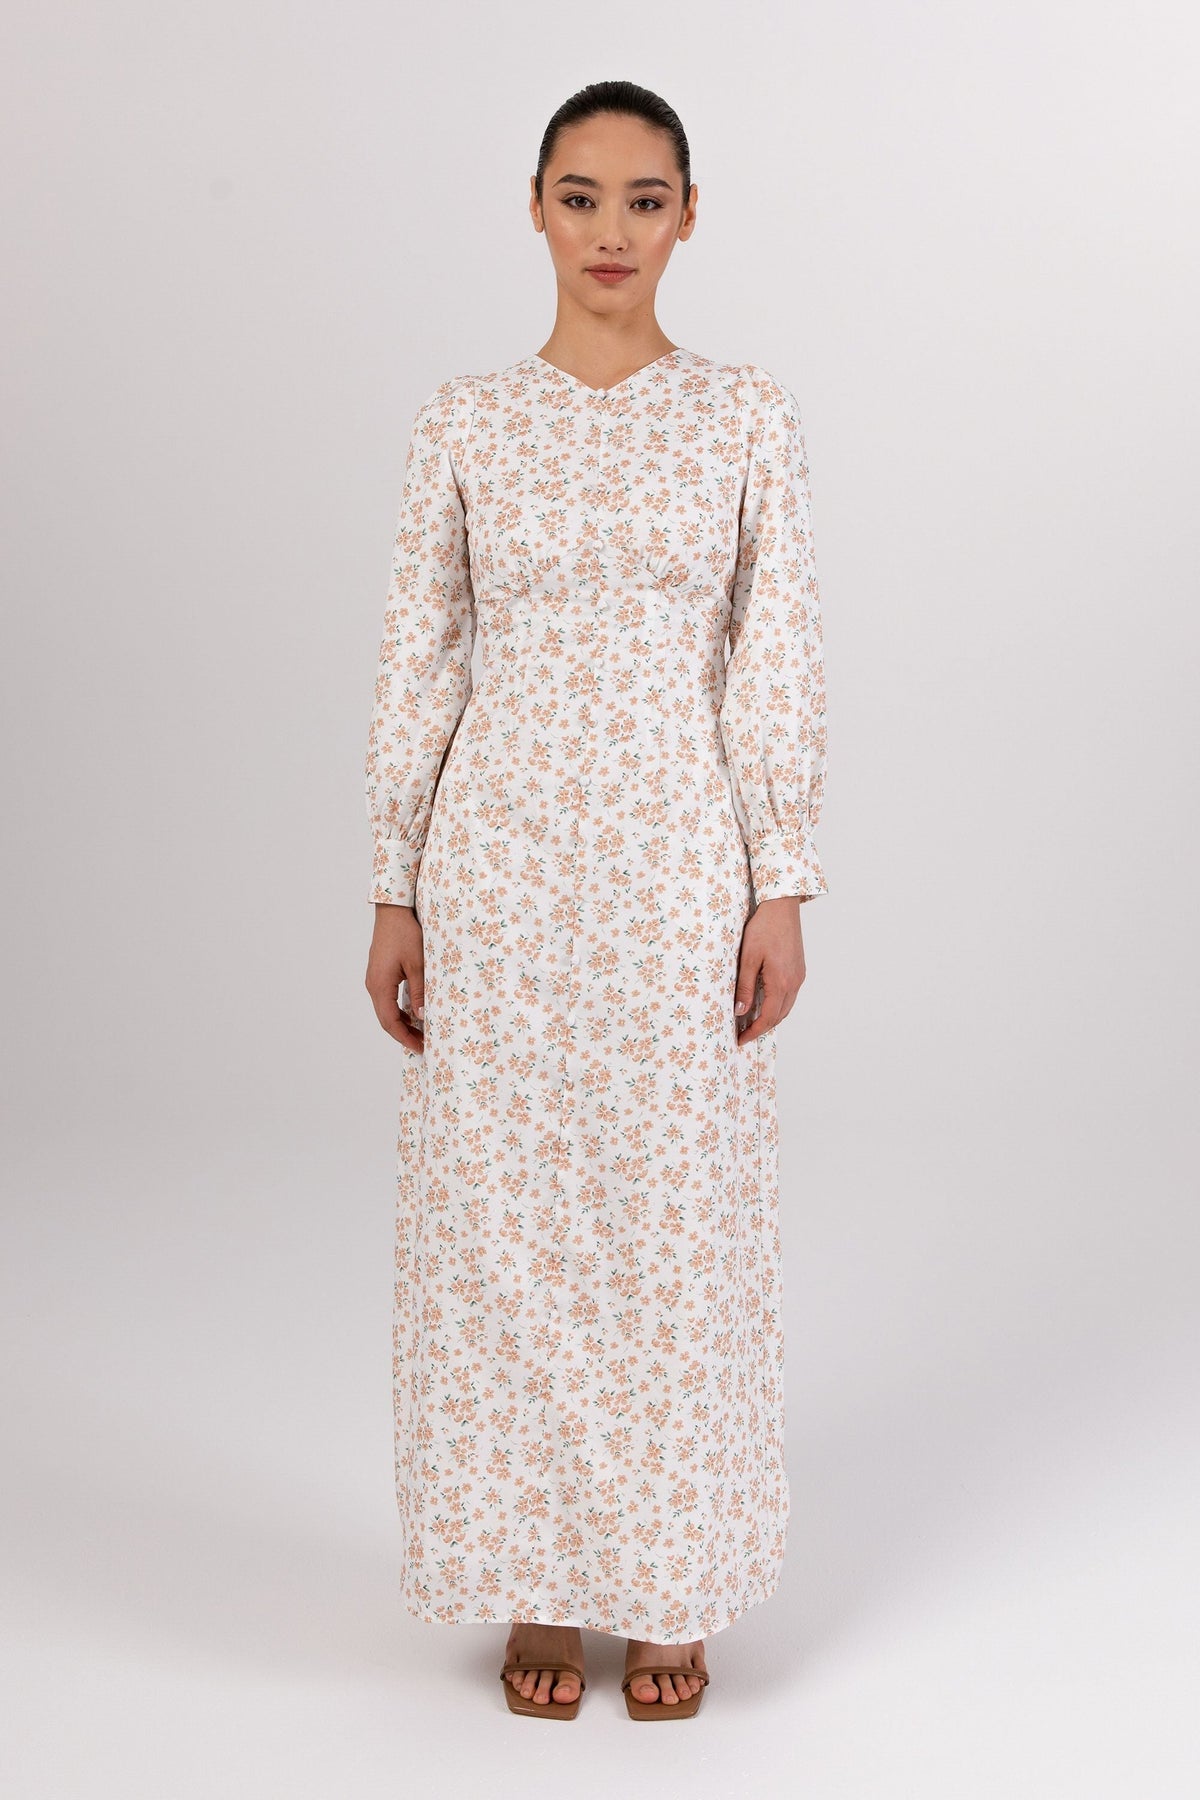 Anaya Button Front Maxi Dress - White Floral epschoolboard 